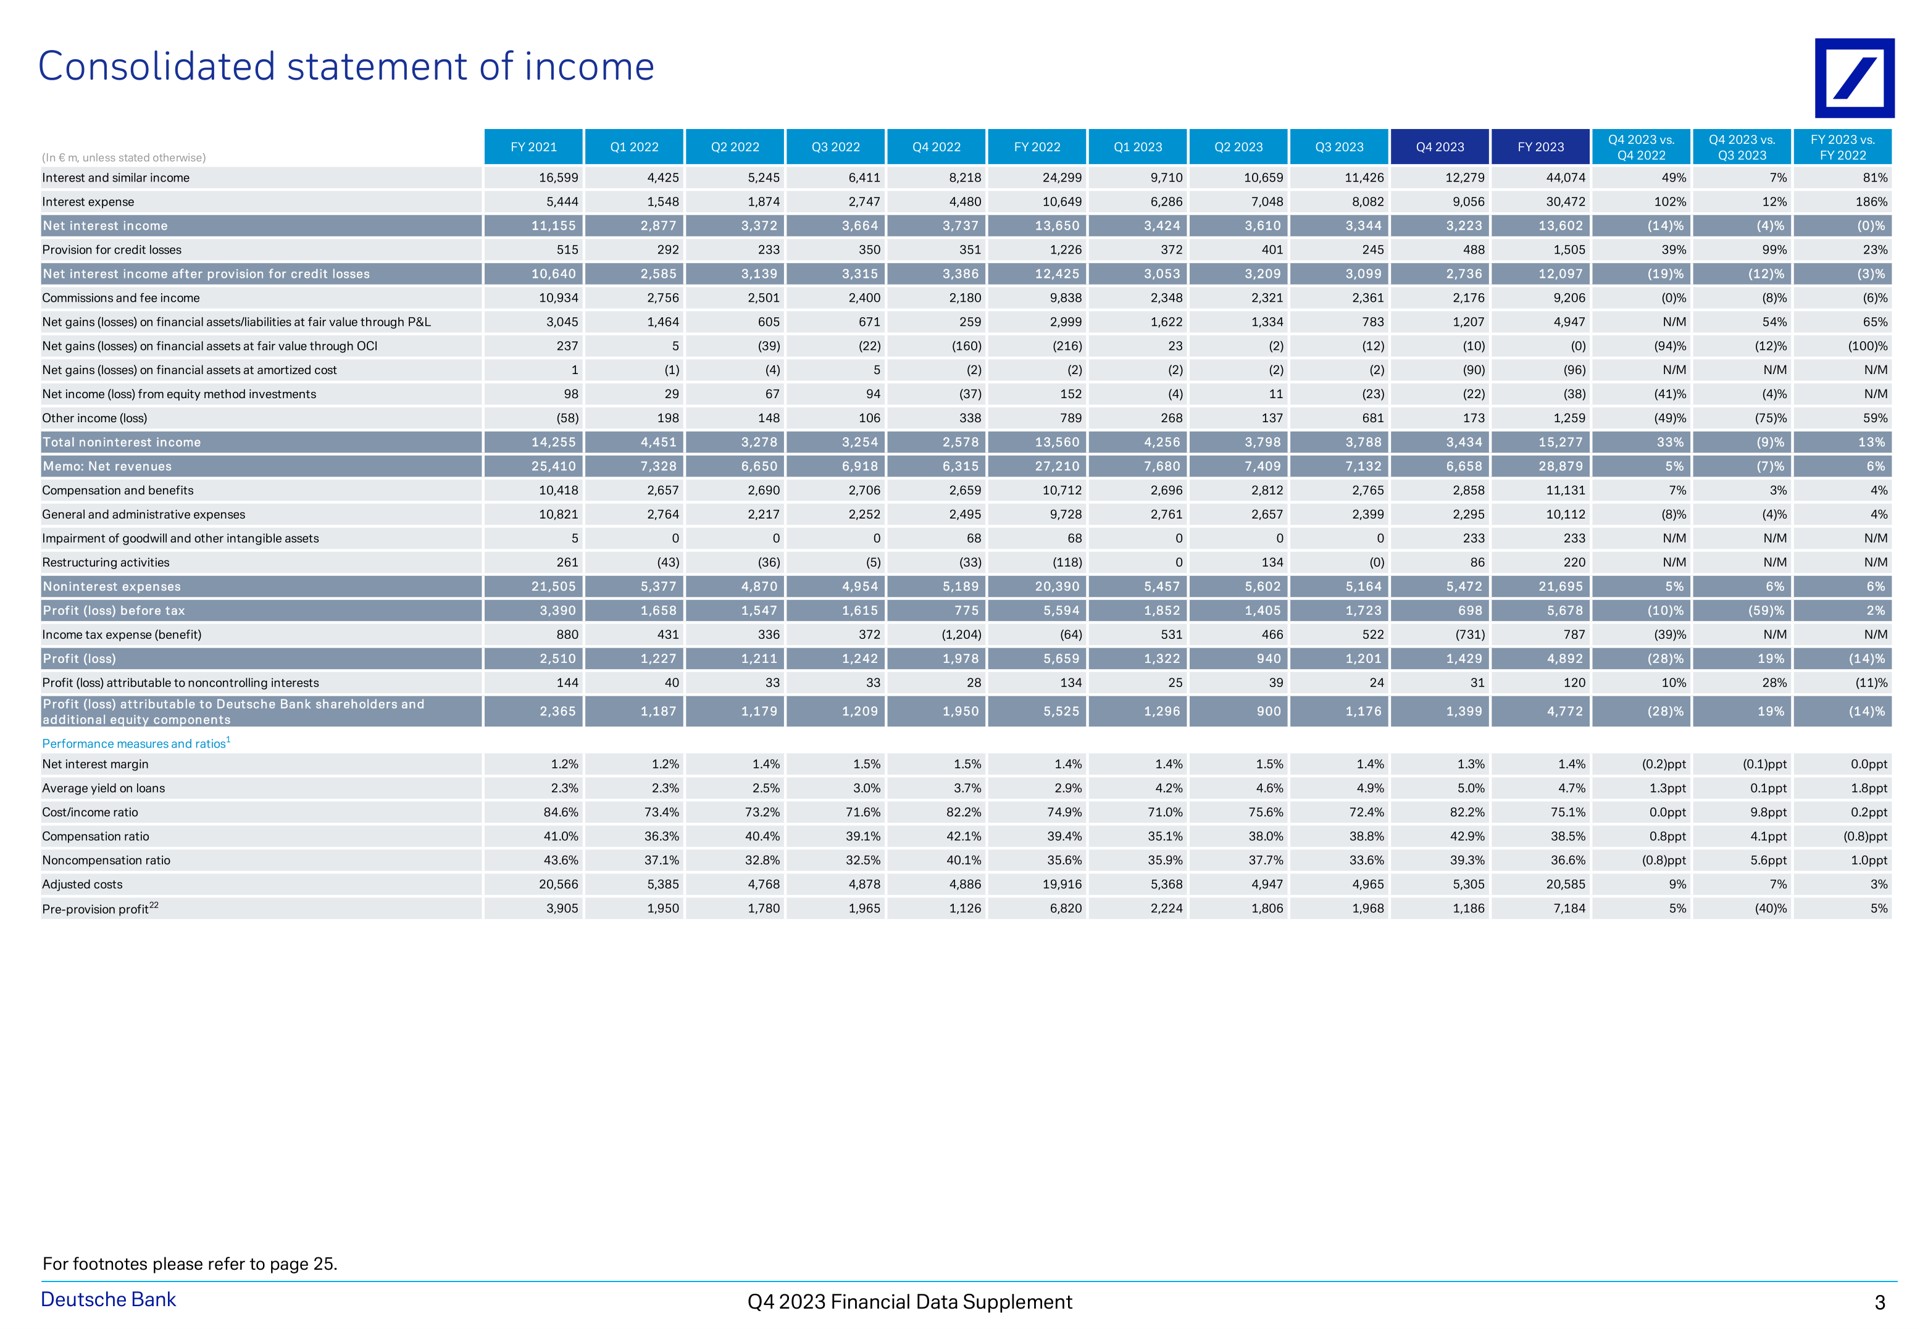 consolidated statement of income a i bank financial data supplement | Deutsche Bank